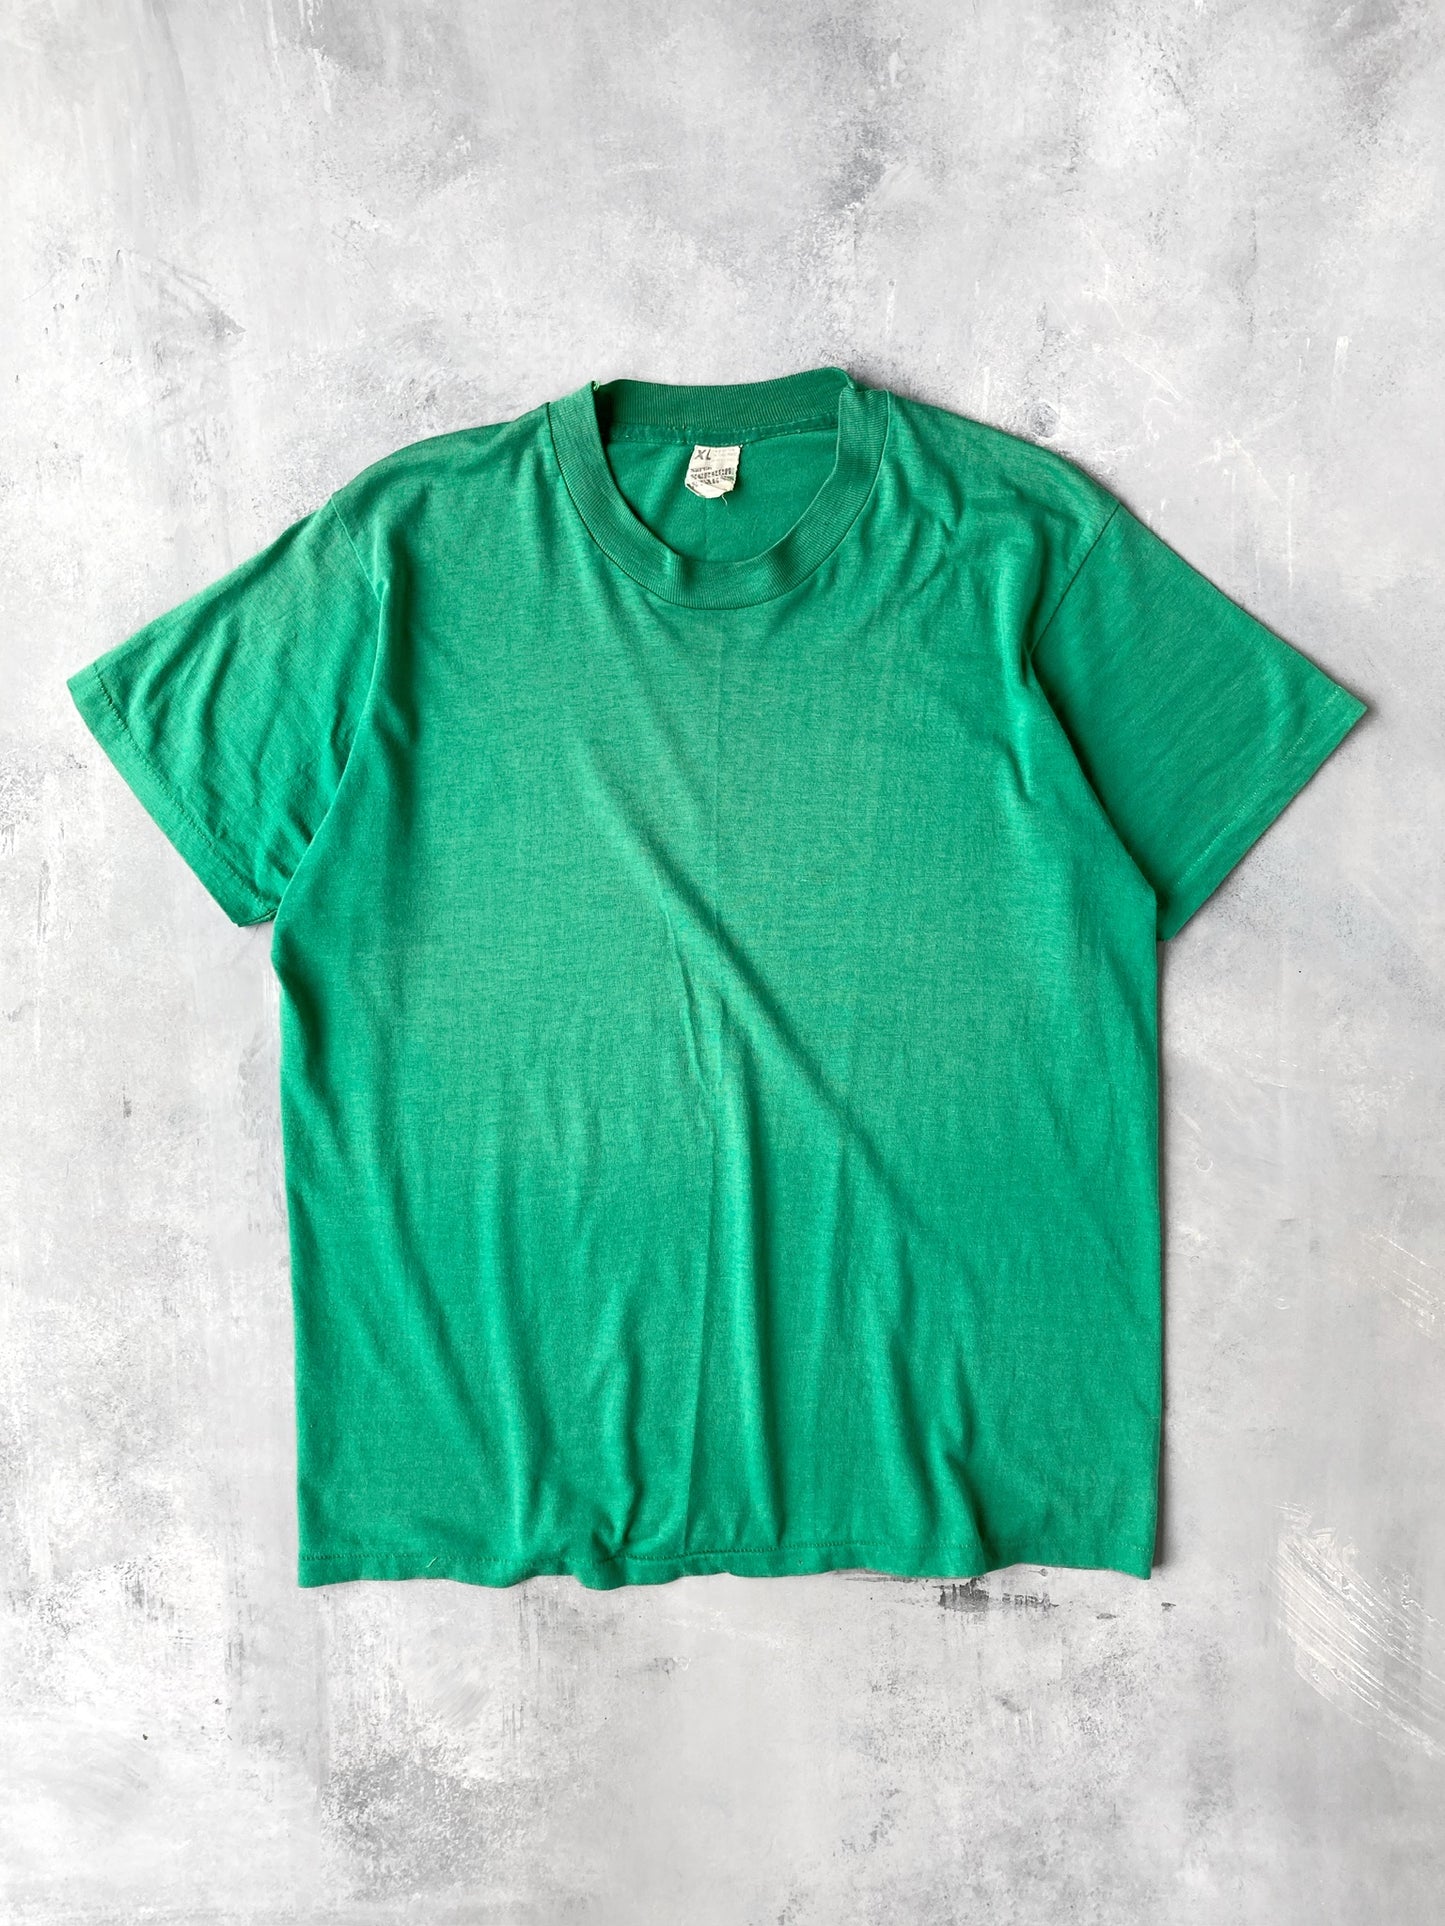 Kelly Green Blank T-Shirt 80's - Large